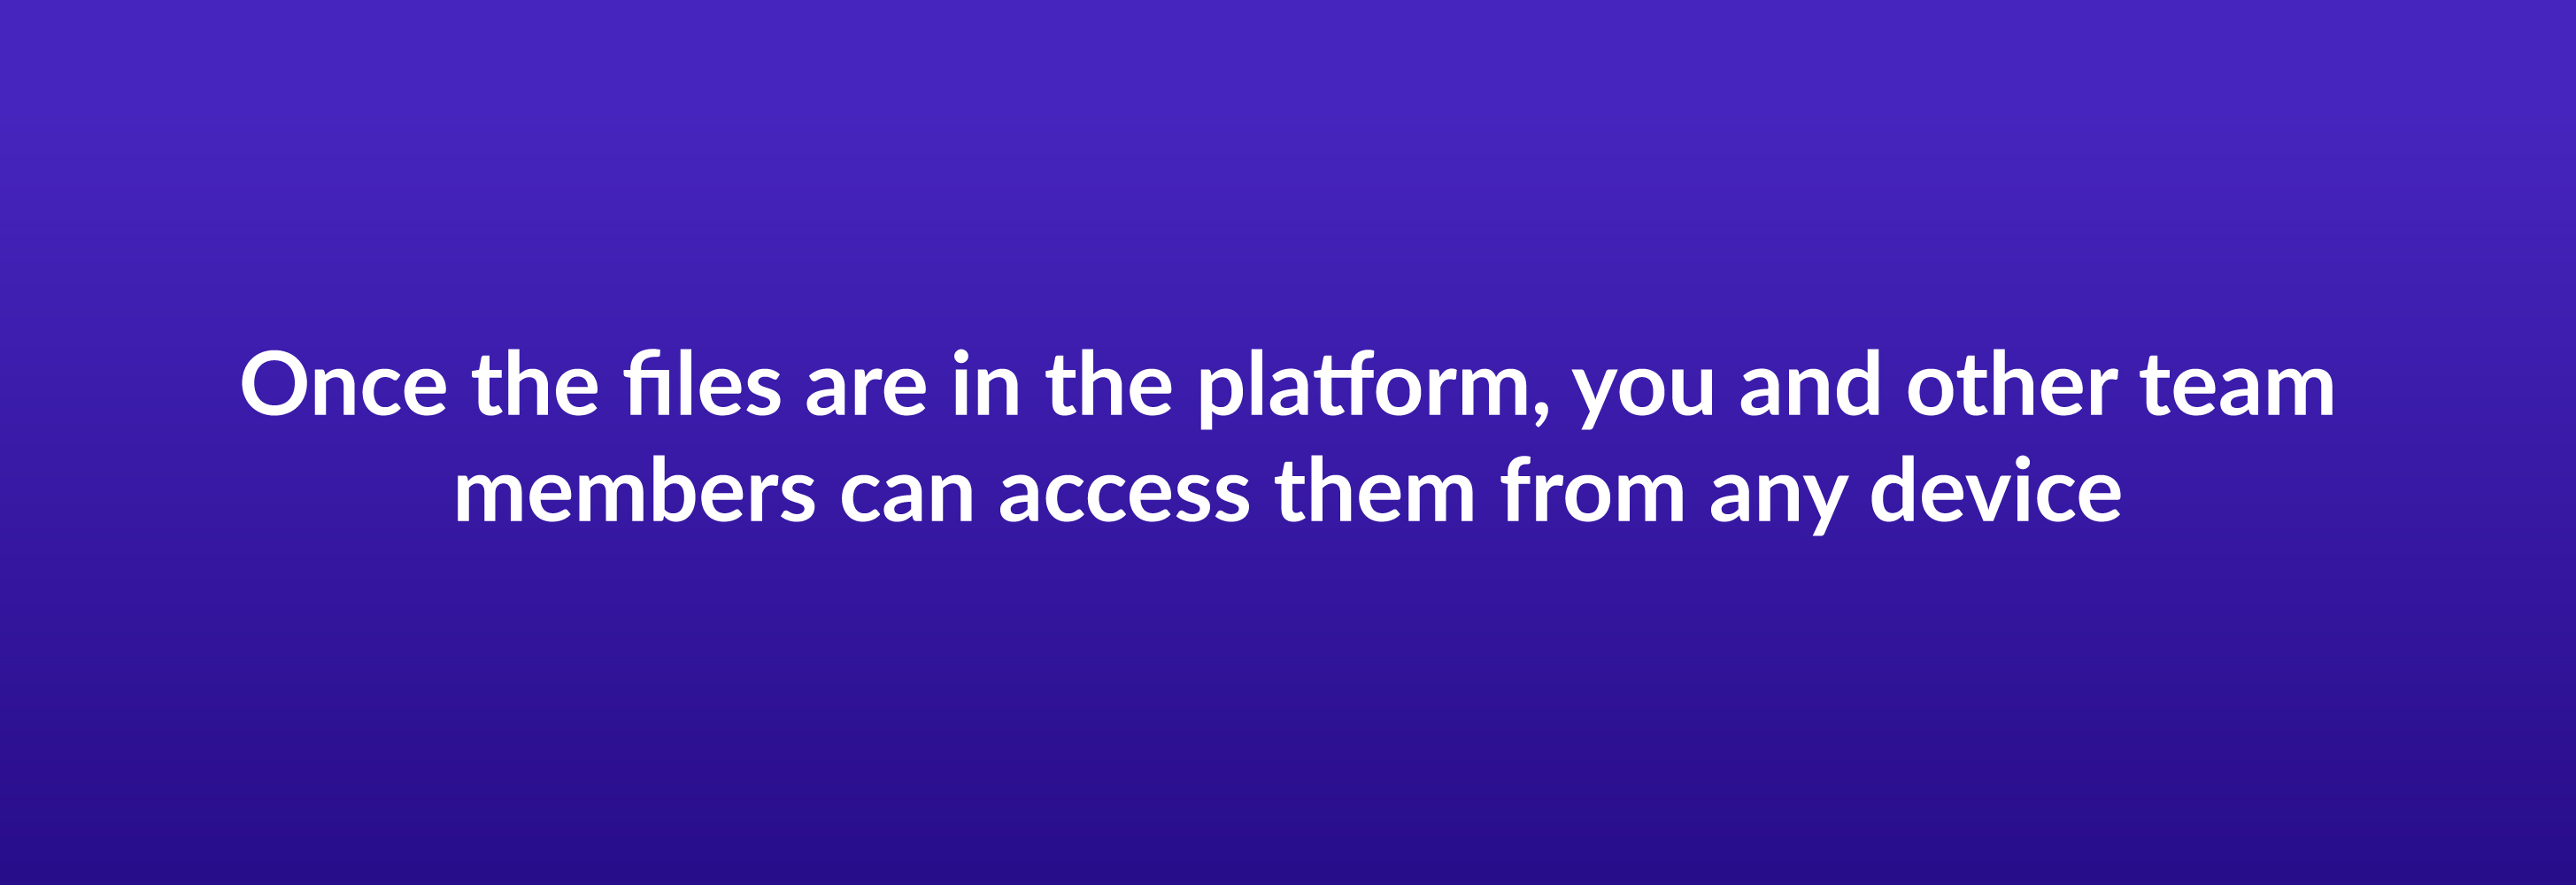 Once the files are in the platform, you and other team members can access them from any device